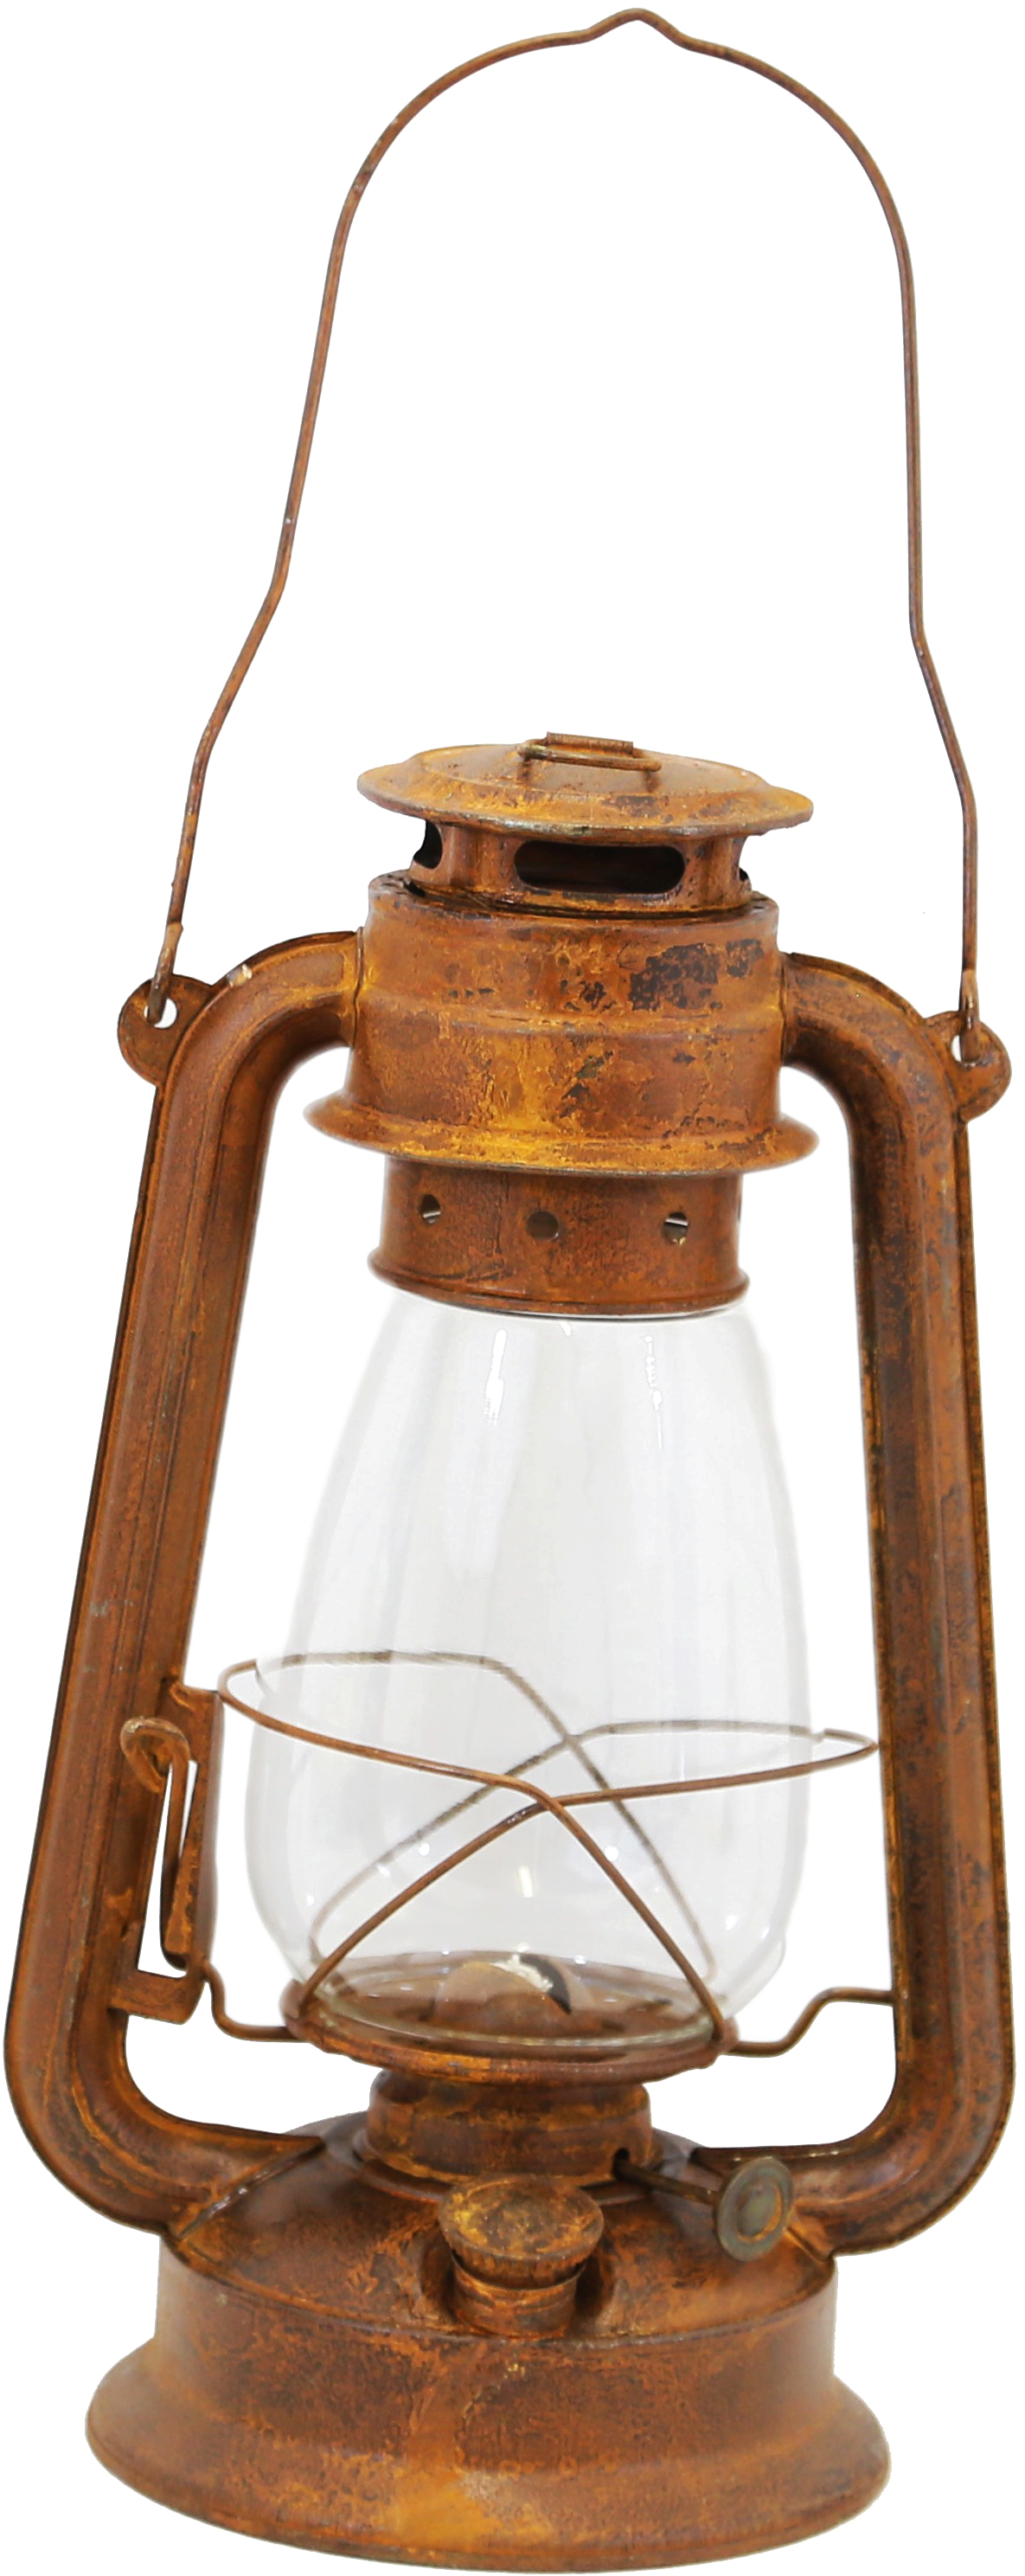 Decorative Lantern Png Picture - Craft Outlet Tin Oil Lantern Finish: Antique Barn Red (3612x3408), Png Download